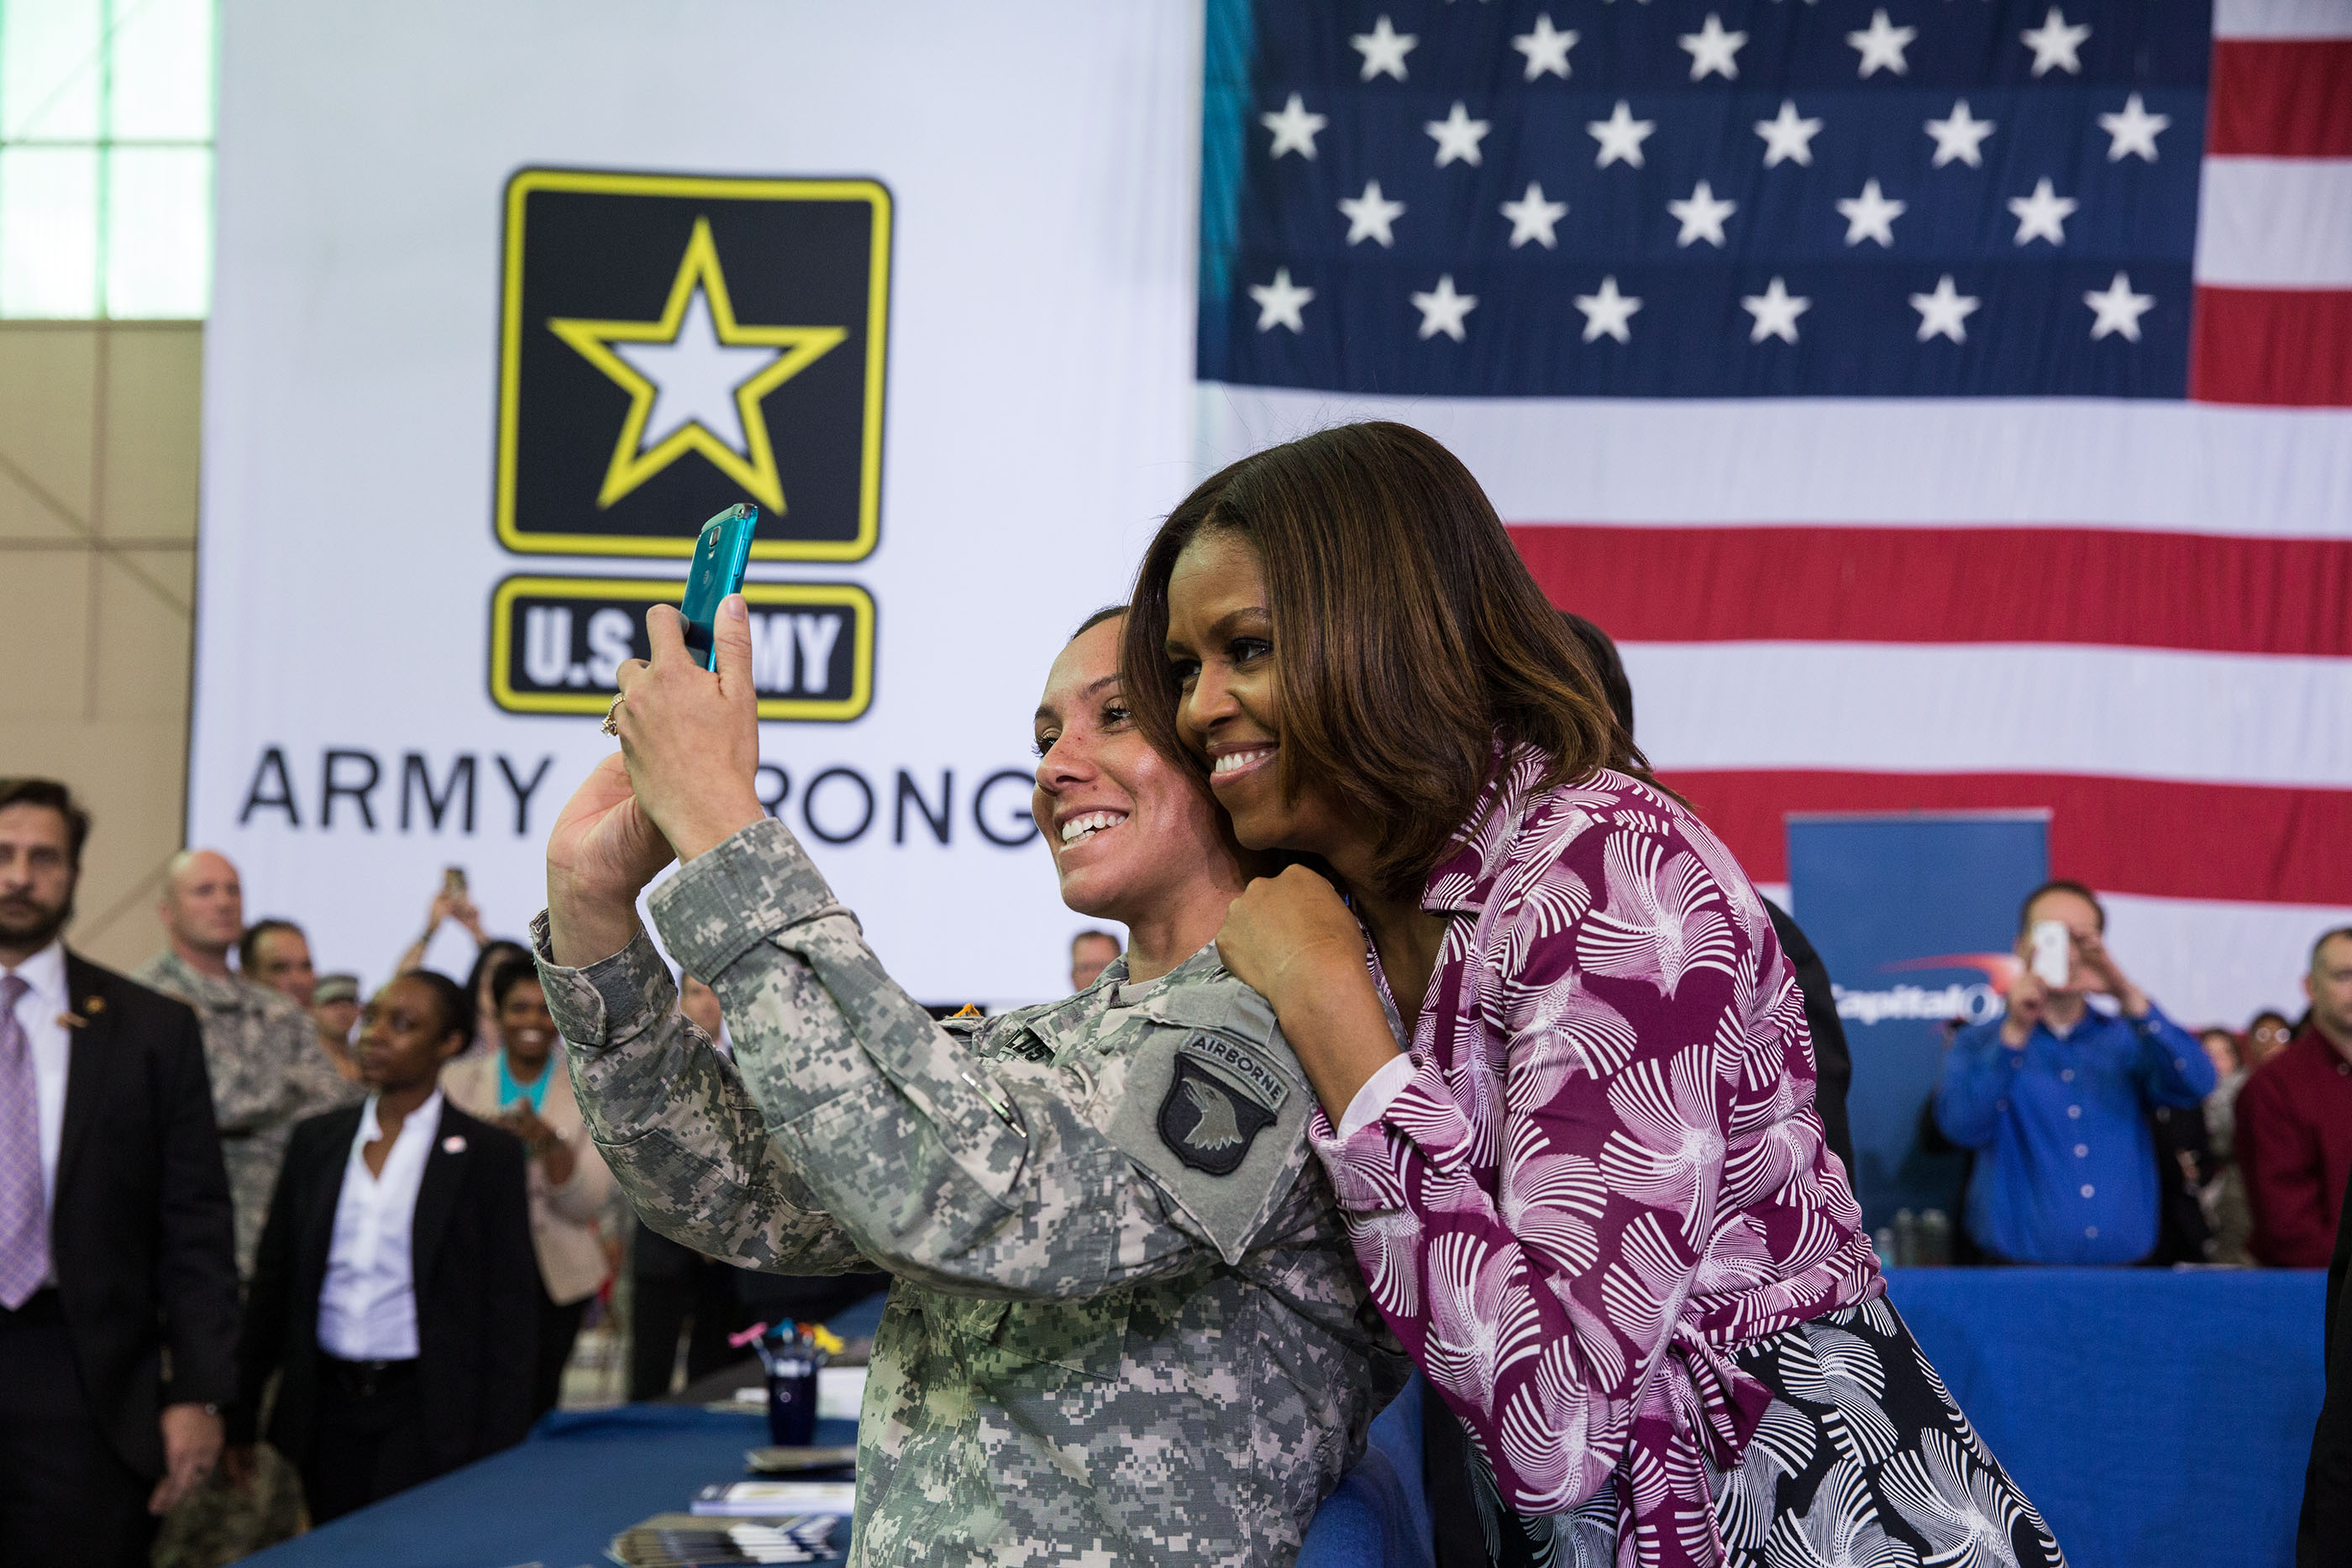 The First Lady poses for a photo at the Fort Campbell Veterans Jobs Summit and Career Forum at Fort Campbell, Ky., April 23, 2014. (Official White House Photo by Amanda Lucidon)